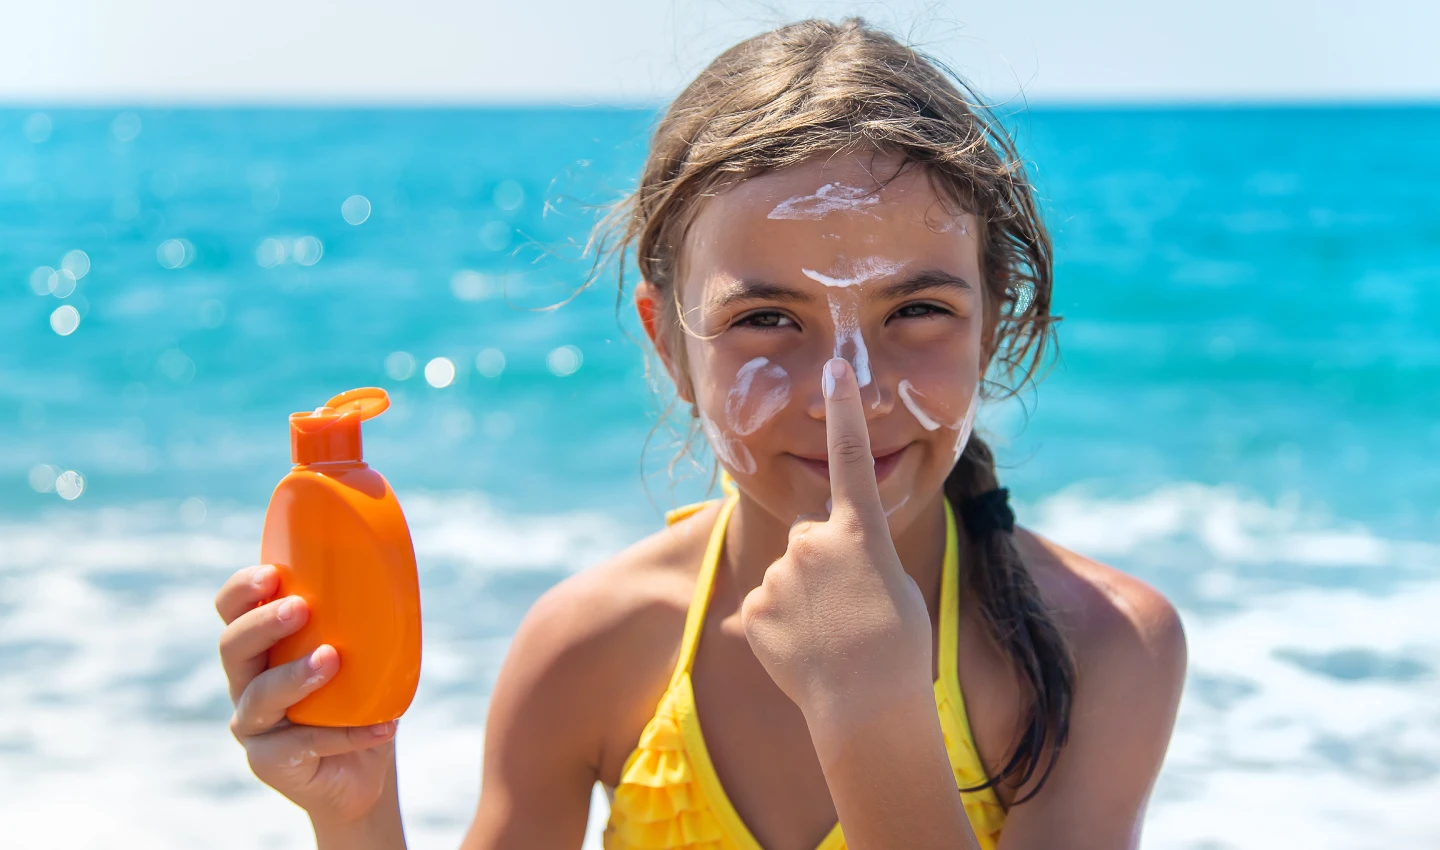 A child applying adventure-proof sunscreen to her nose, grinning happily.